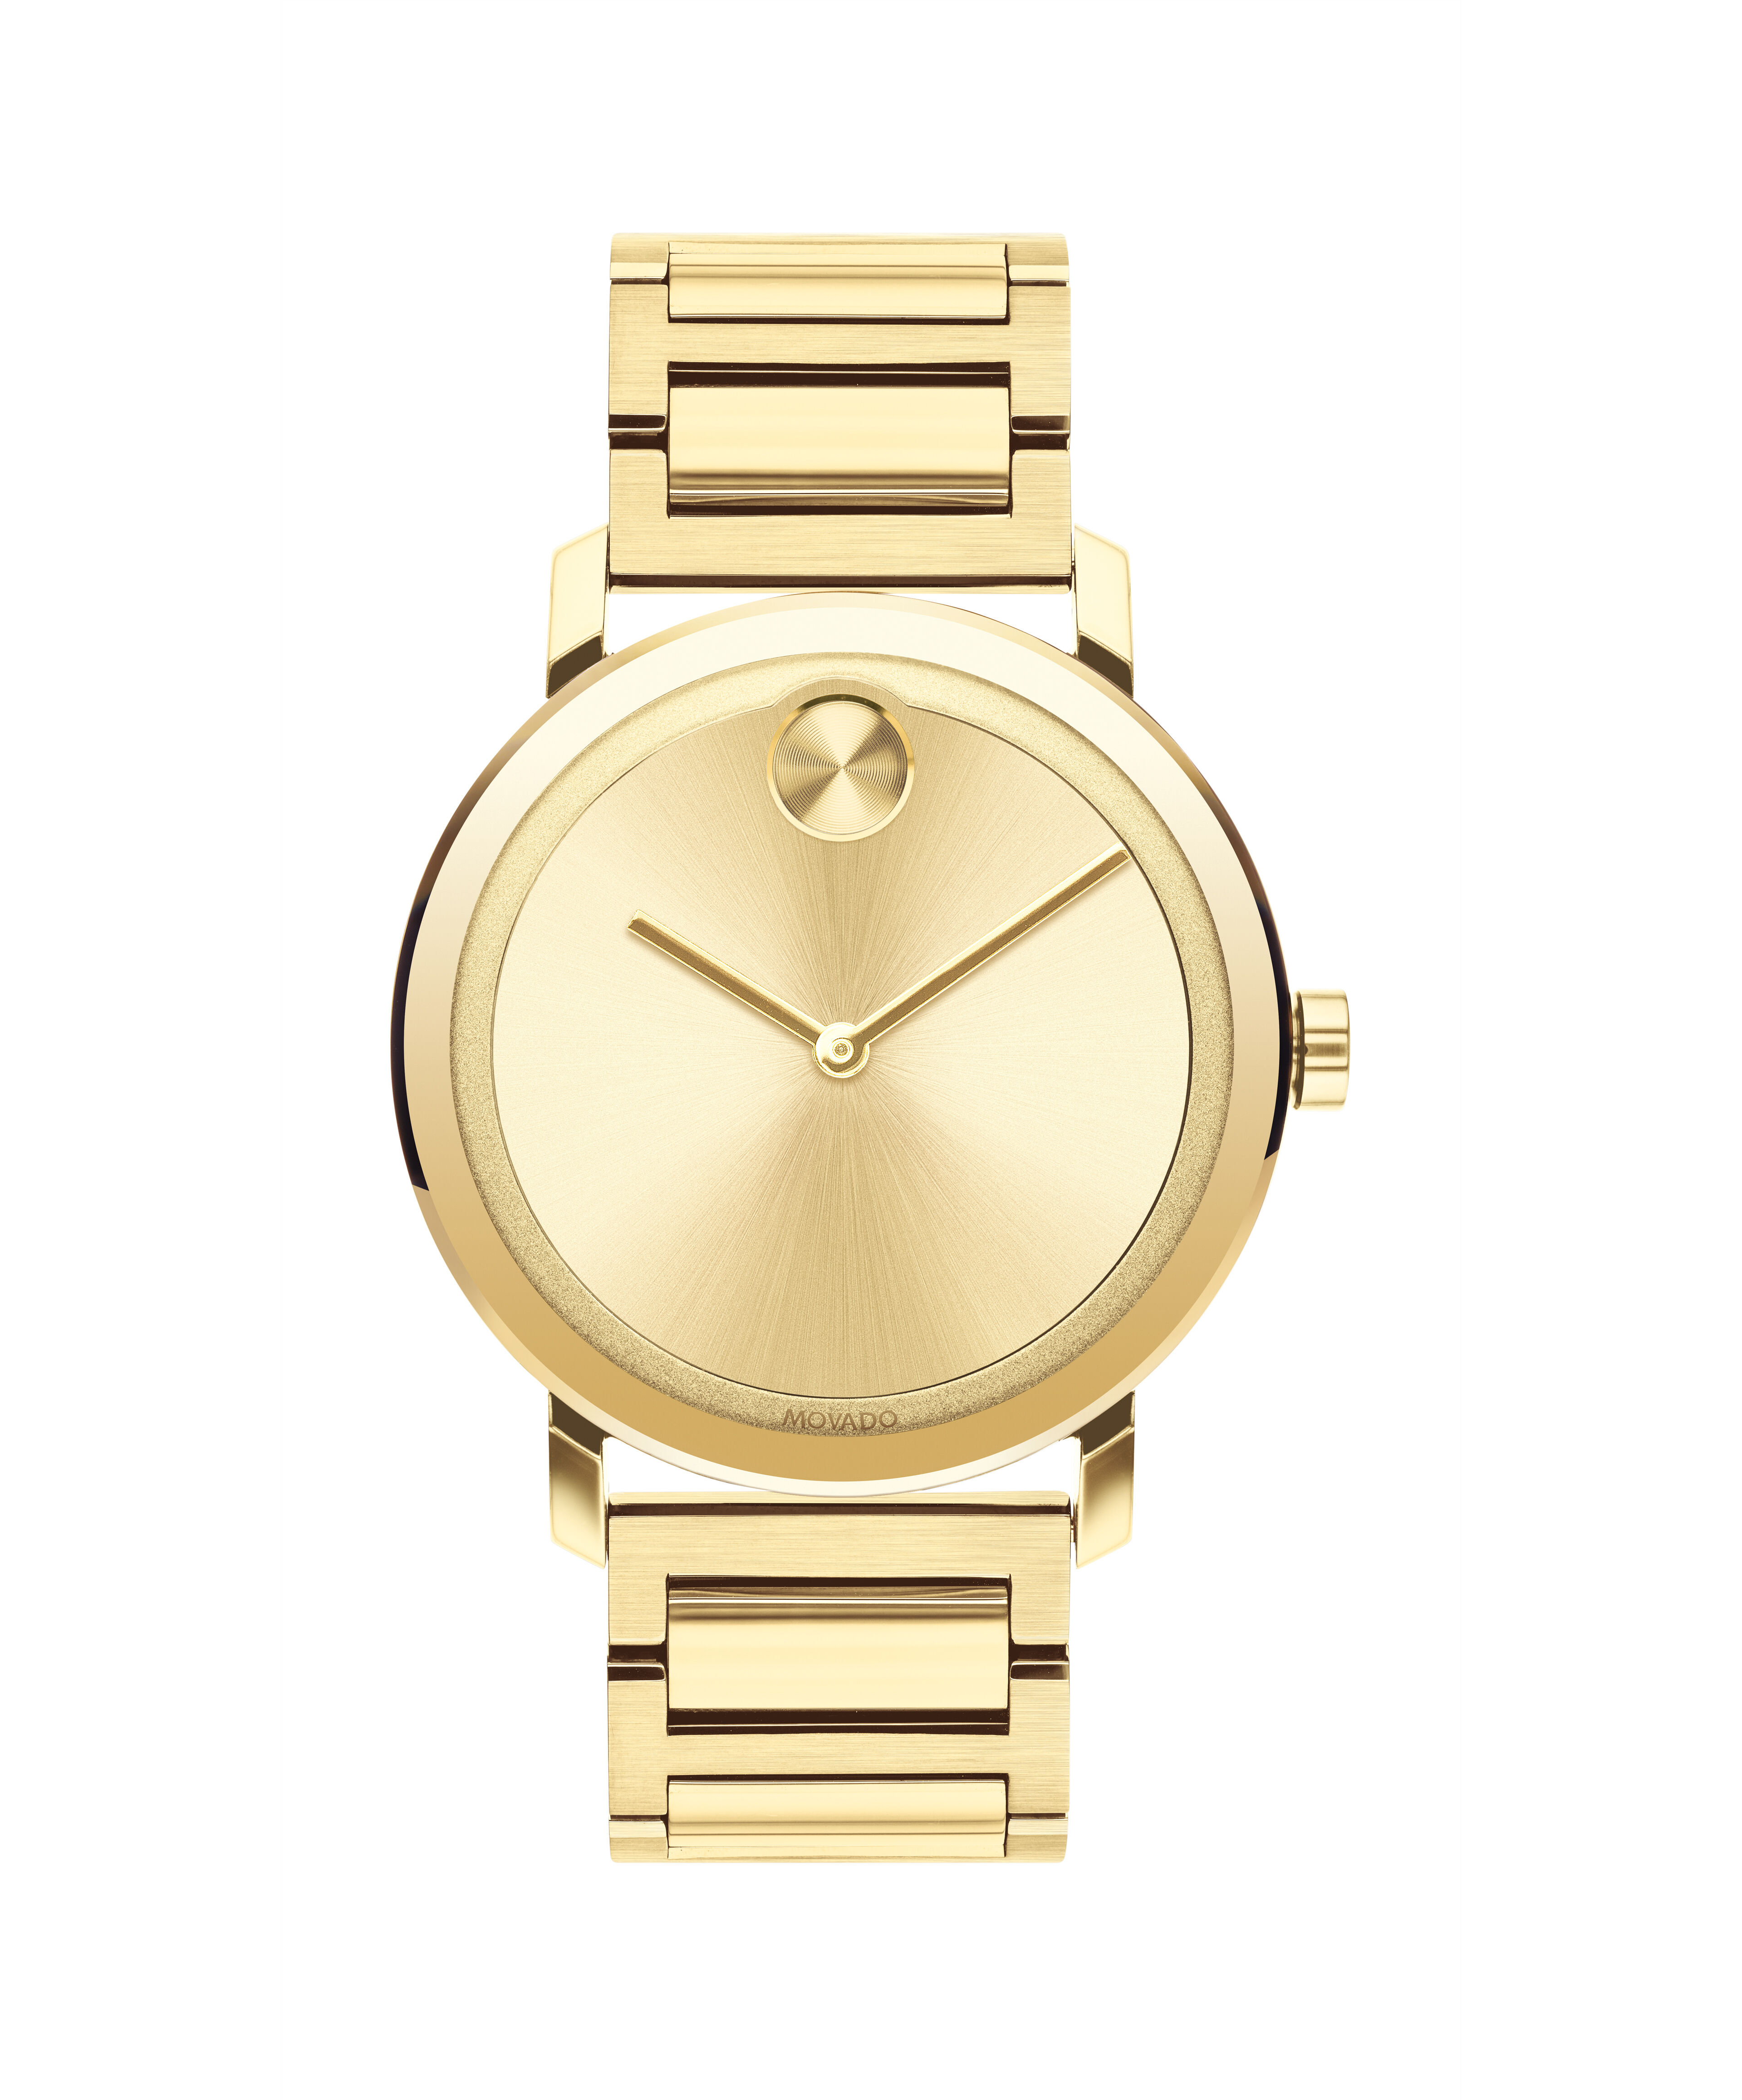 Movado Museum Classic Steel/Gold 35 mm. Ref. 8I A2 890.I